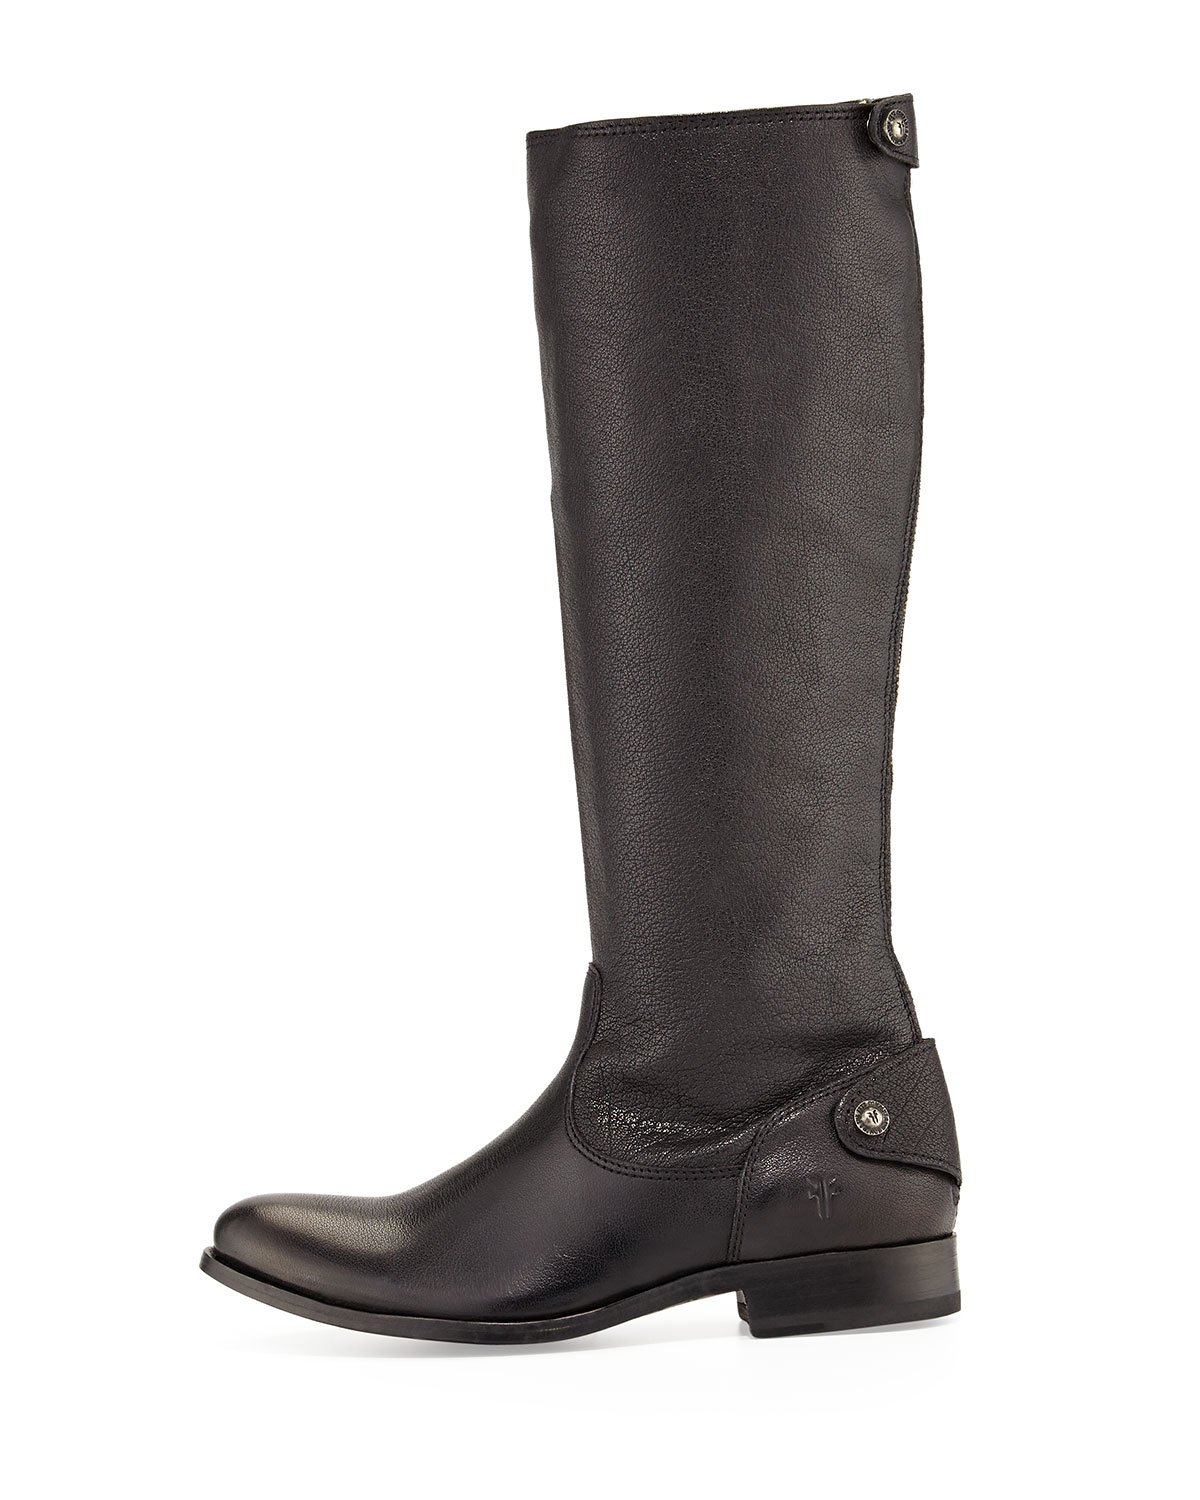 Lyst - Frye Melissa Leather Zip-back Riding Boot in Black